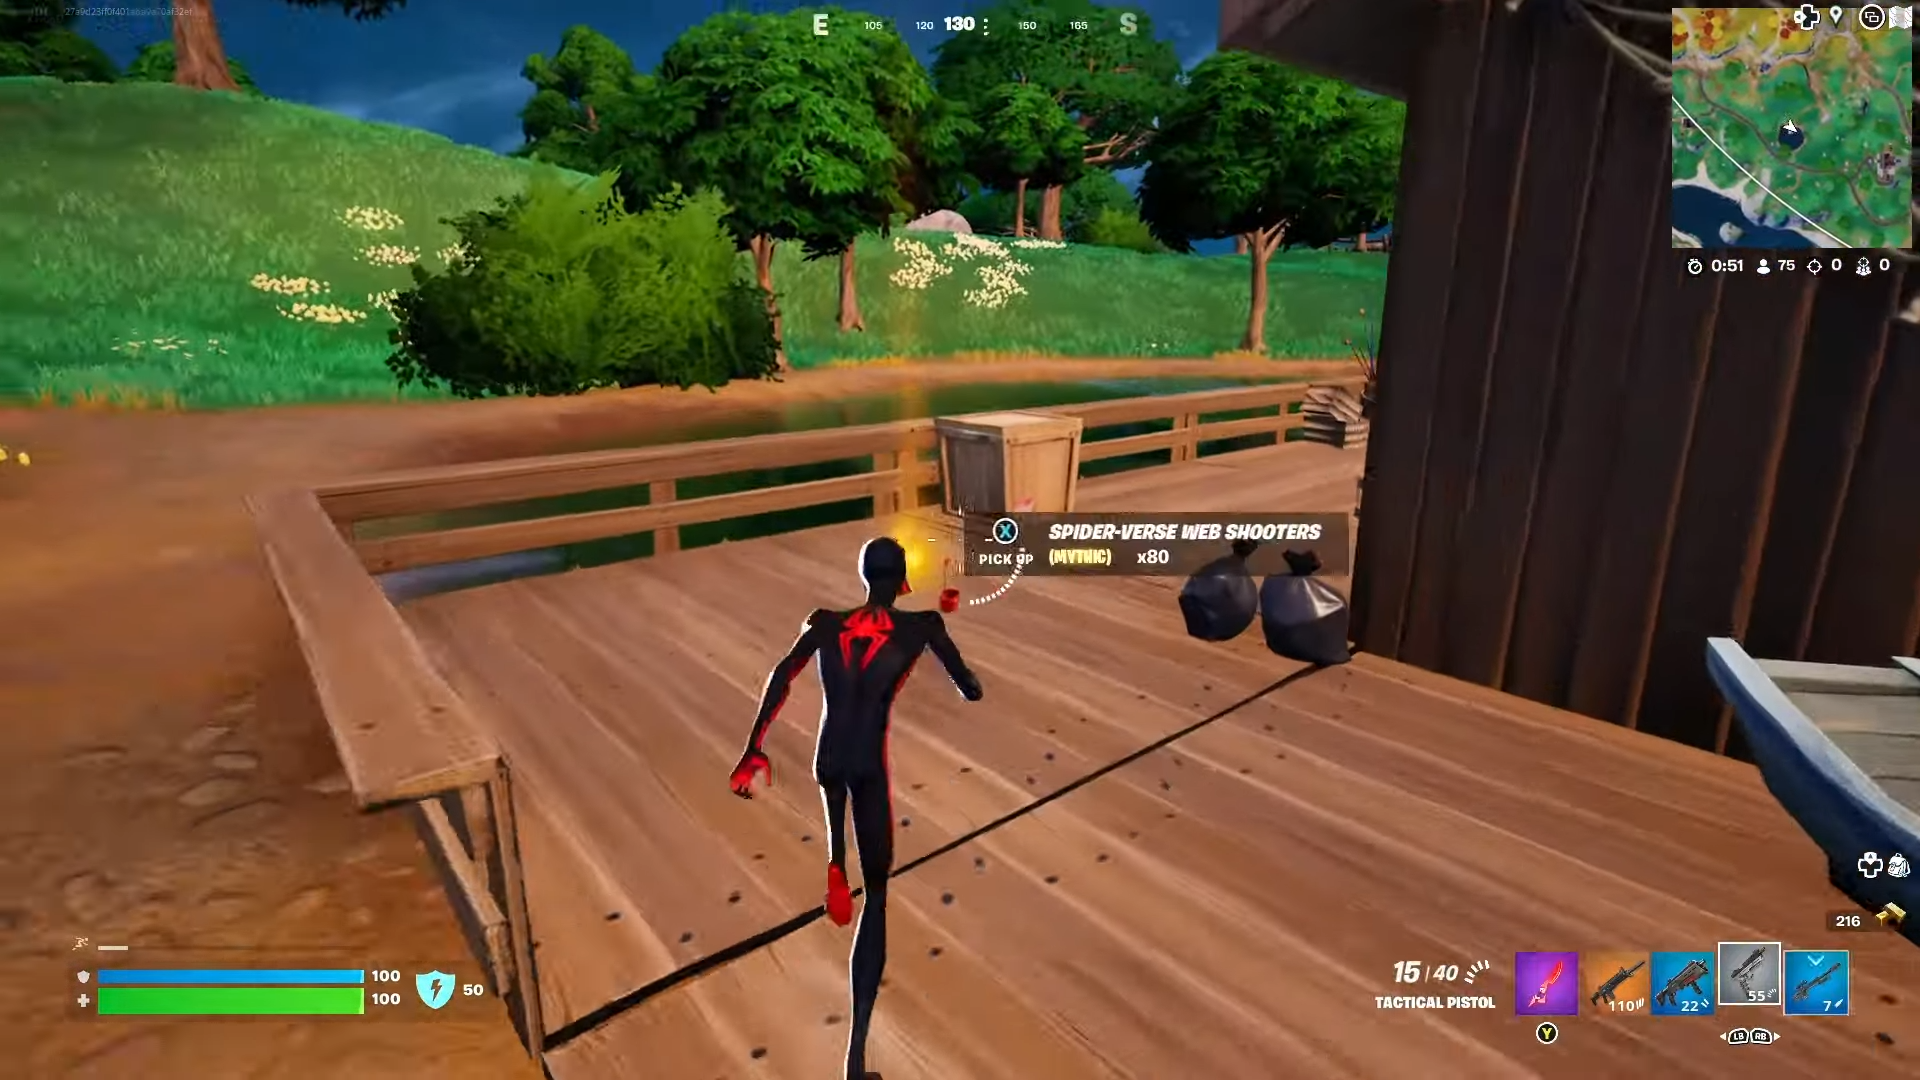 Where To Find The Spider Verse Web Shooters In Fortnite